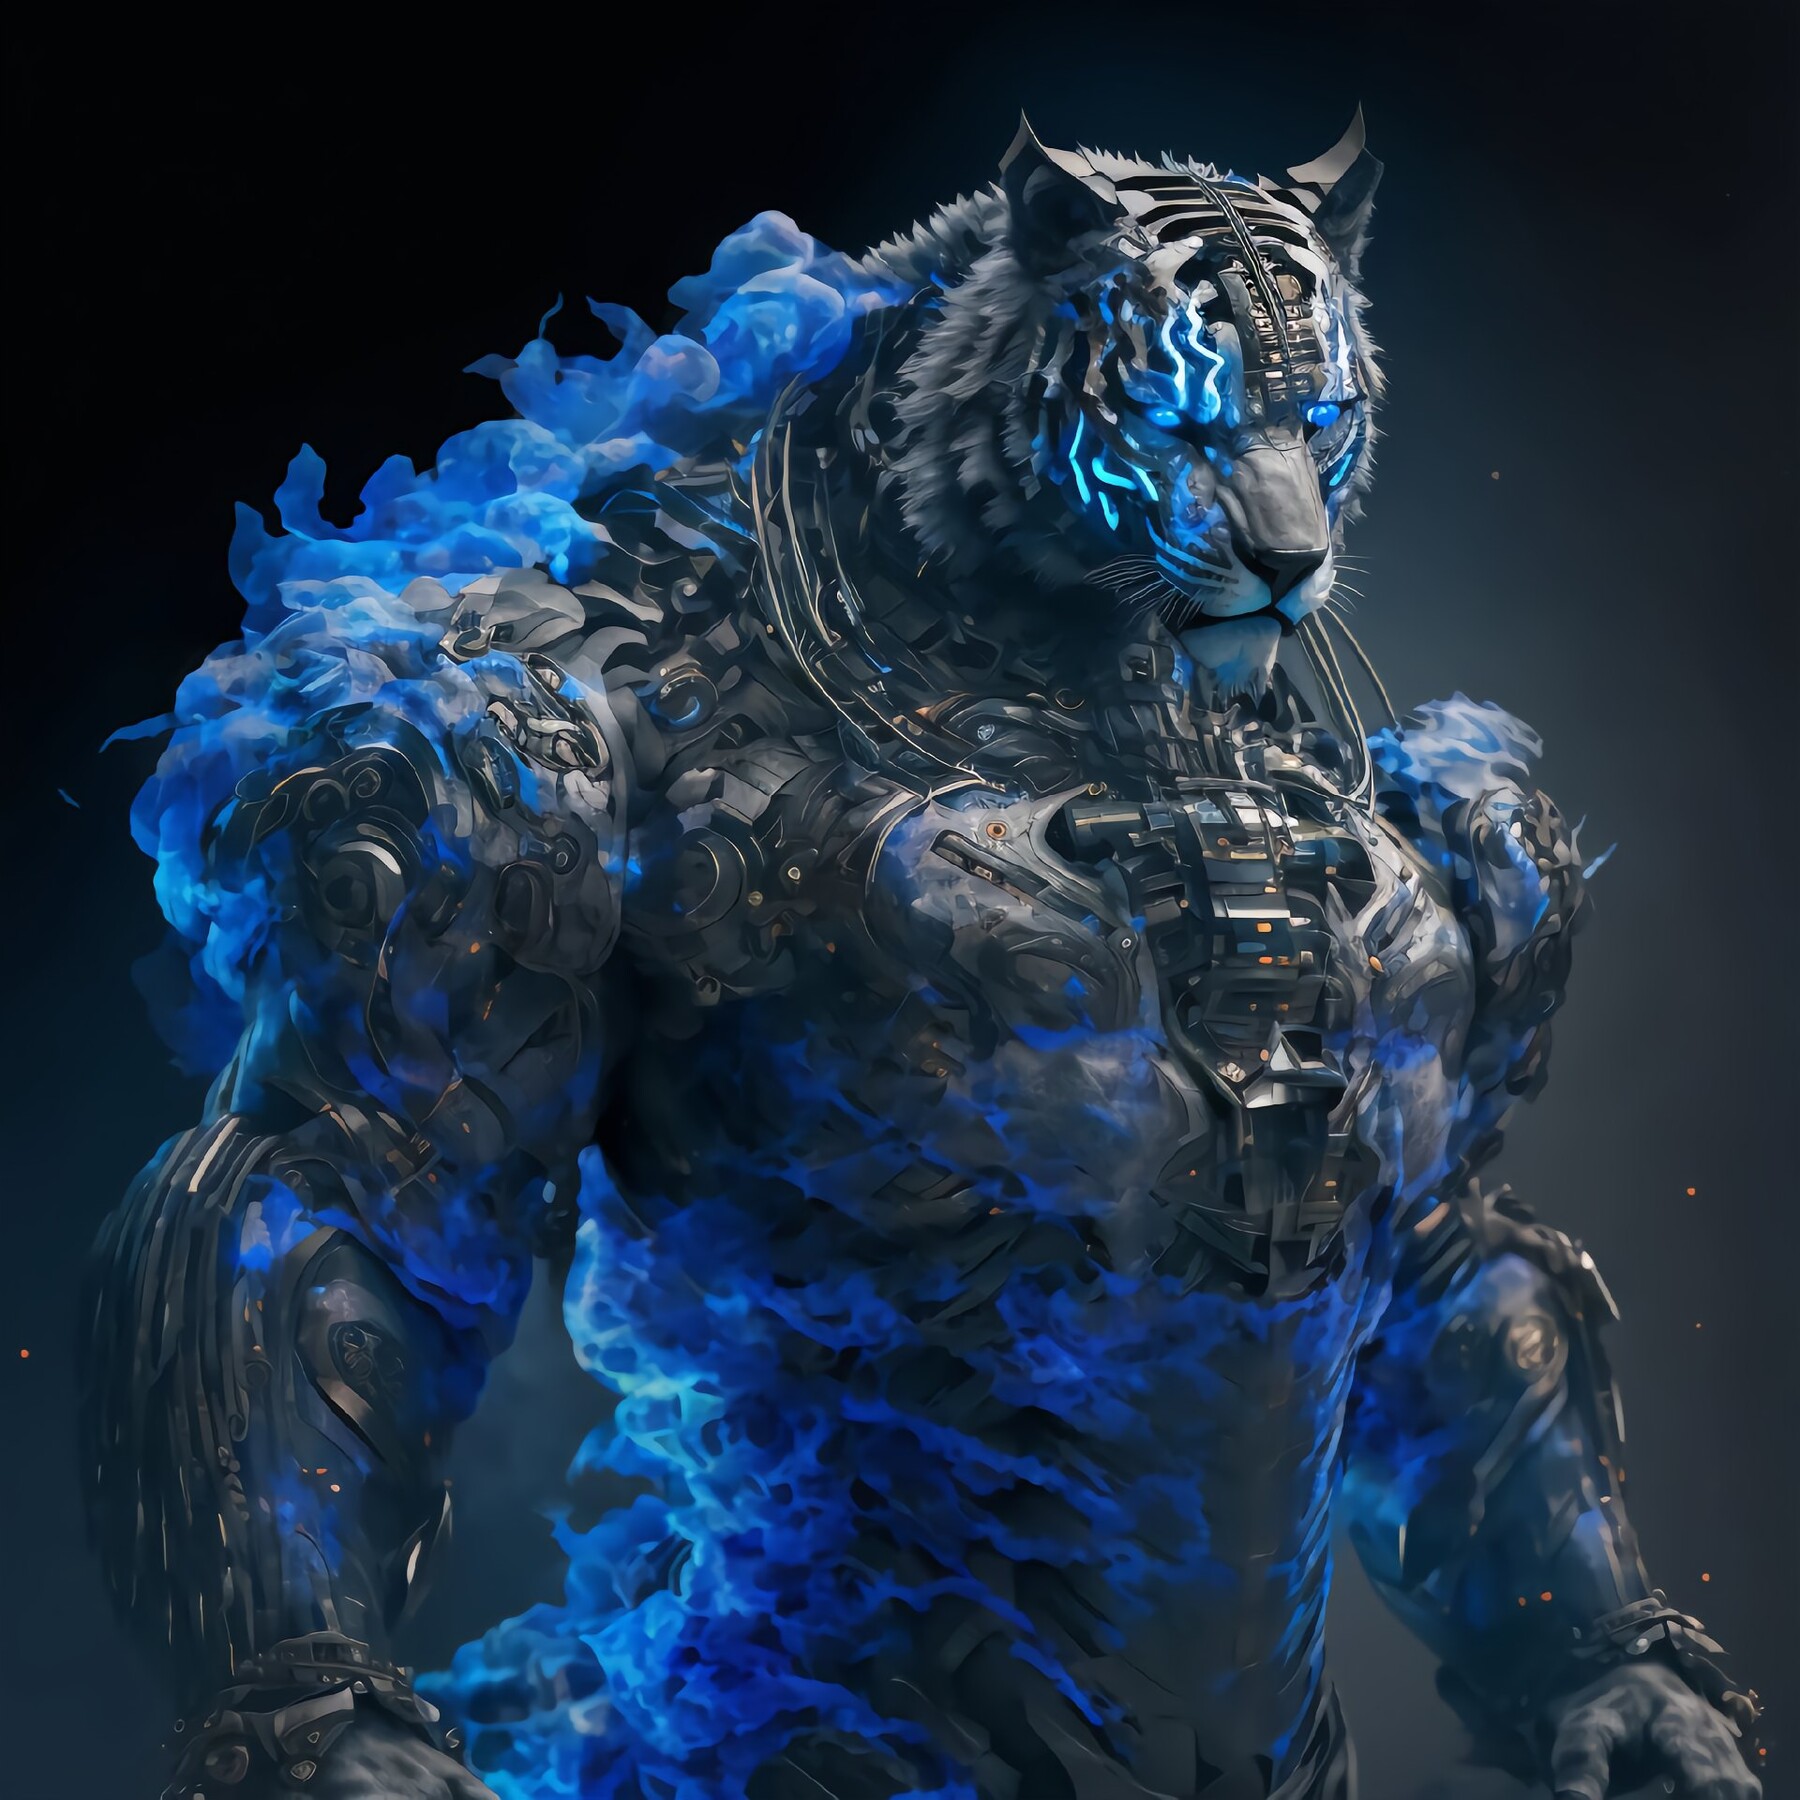 ArtStation - Blue Flame Animals series picture group | Artworks